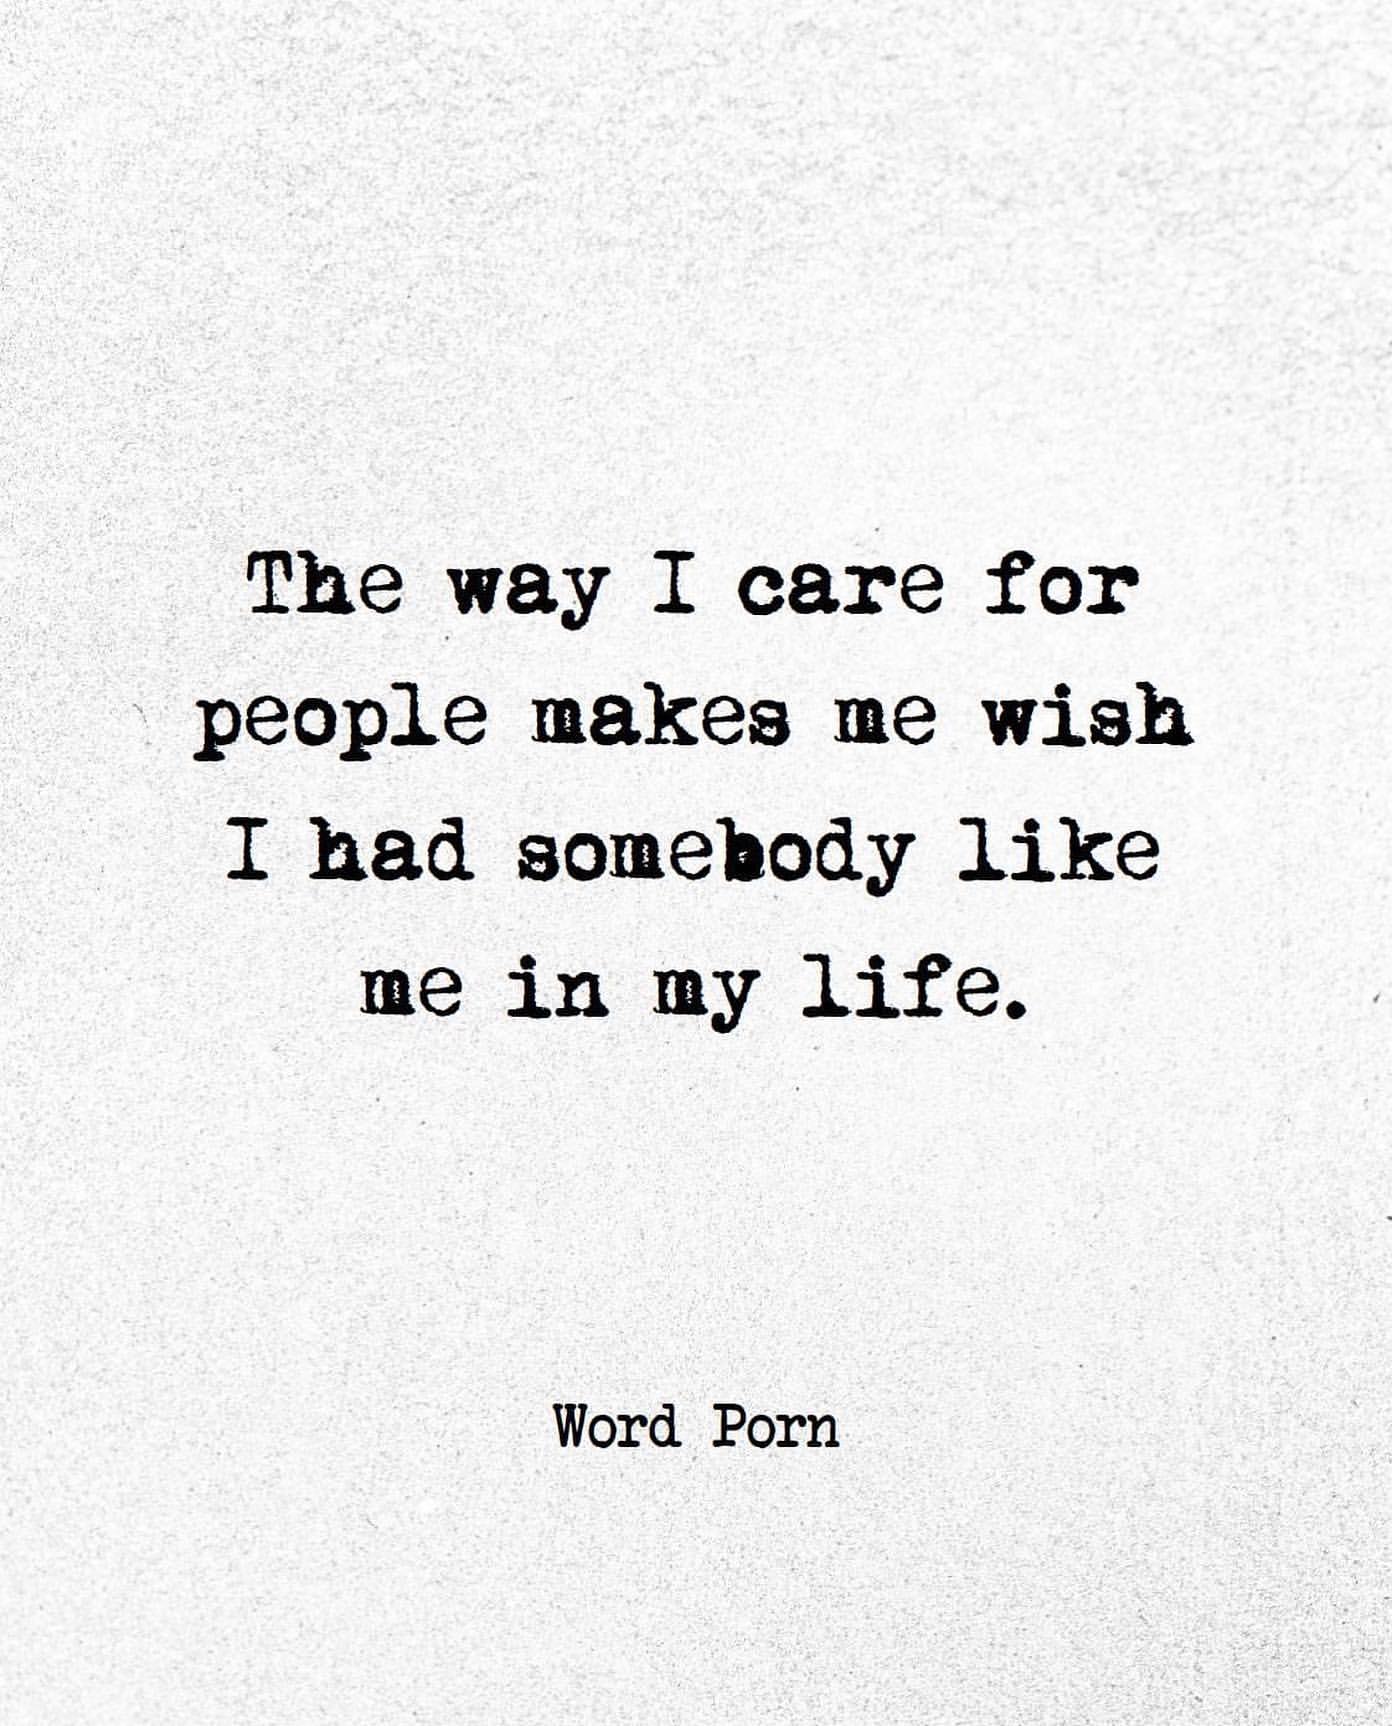 The way I care for people makes me wish I had somebody like me in my life.